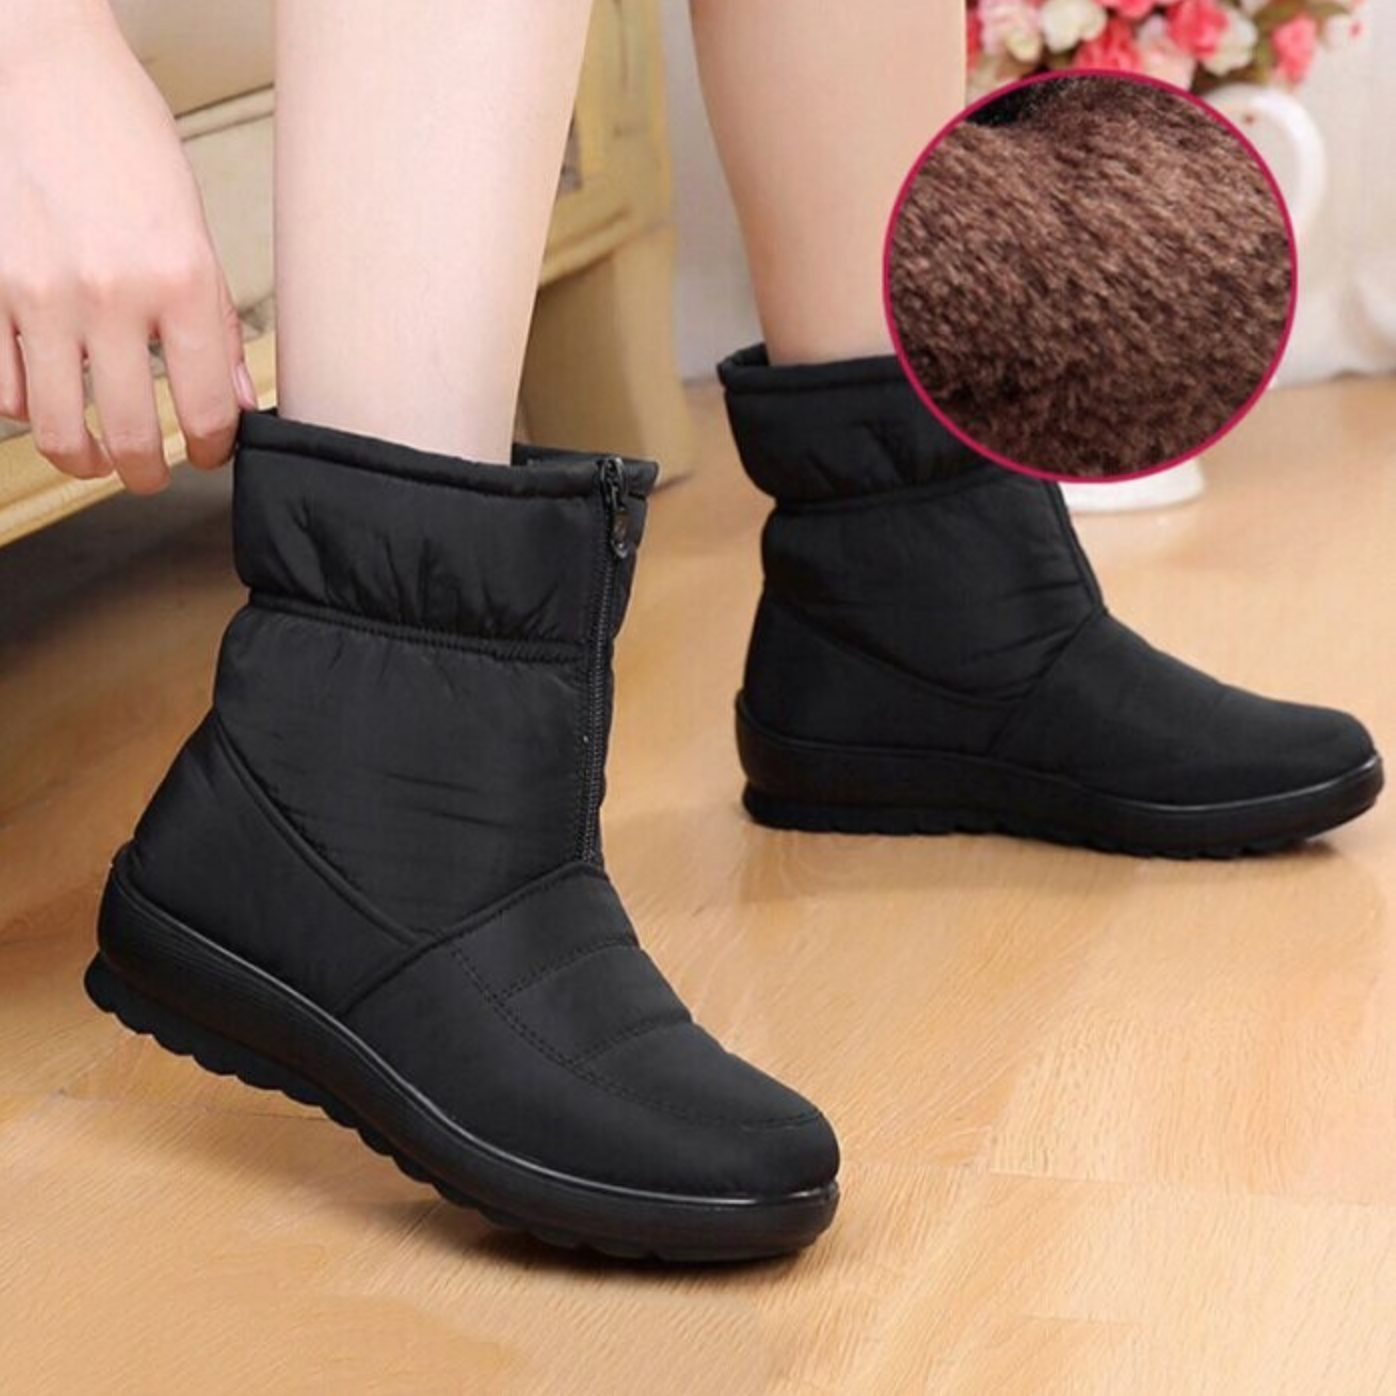 🔥2022 Women's Warm Snow Boots, Fur Lining Water Resistant Winter Shoes🎉